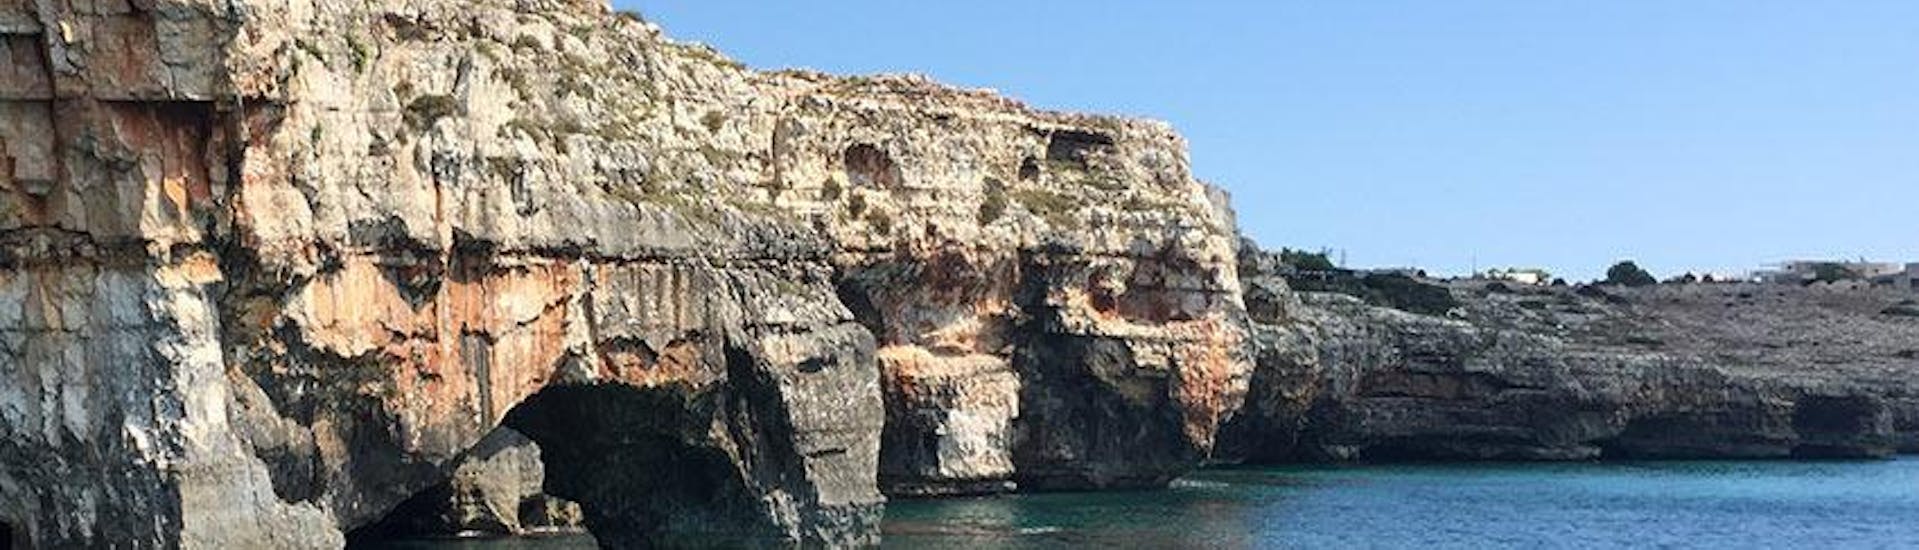 One of the many caves that you can admire during the boat trips with Noleggio Nettuno Torre Vado.